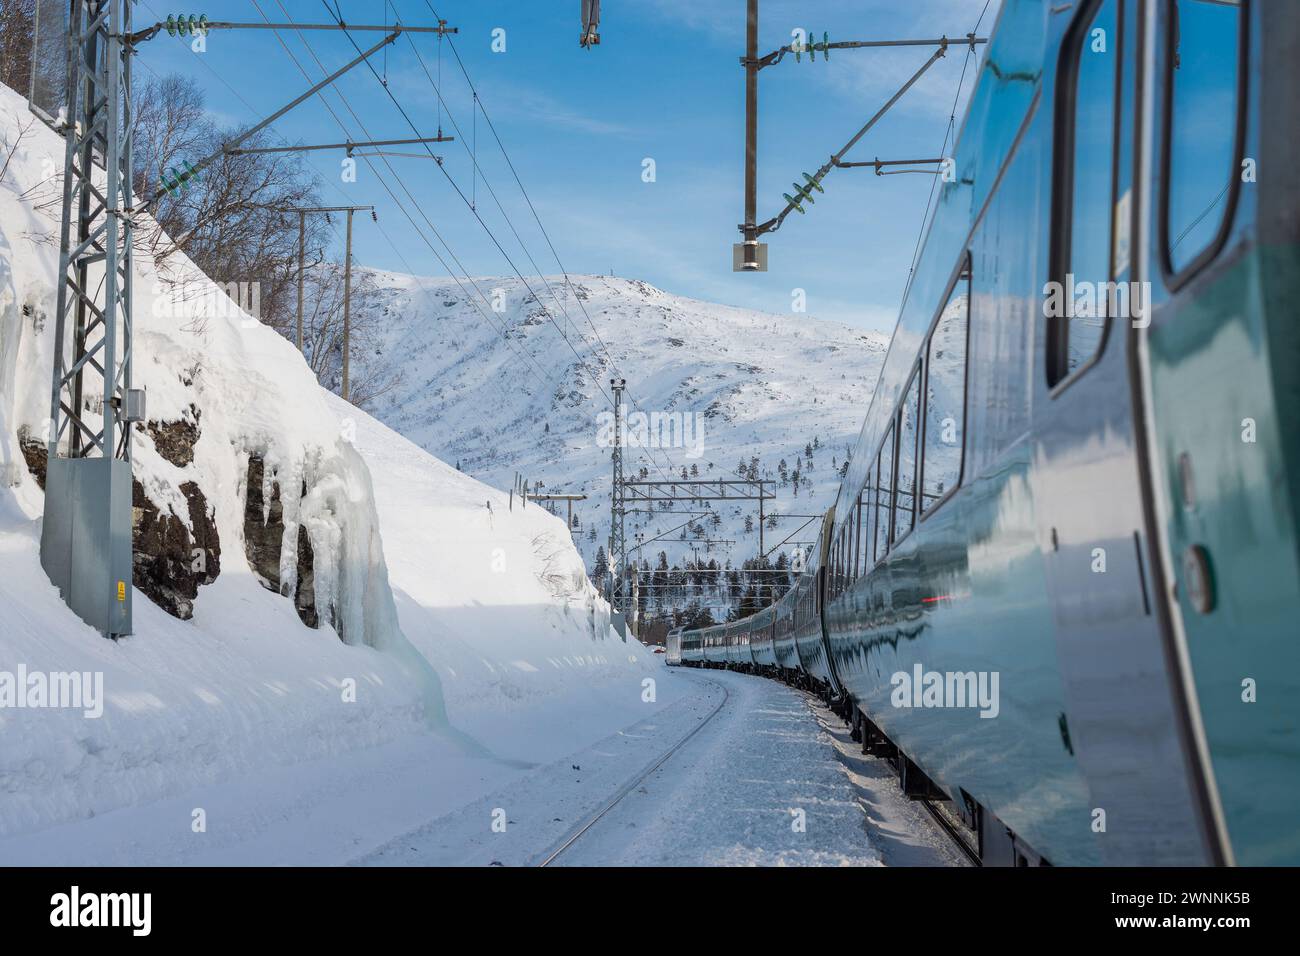 Tran on the famous Bergen - Oslo line is standing on the first track at Mjolfjell train station in the middle of the route. Snow and winter capped mou Stock Photo